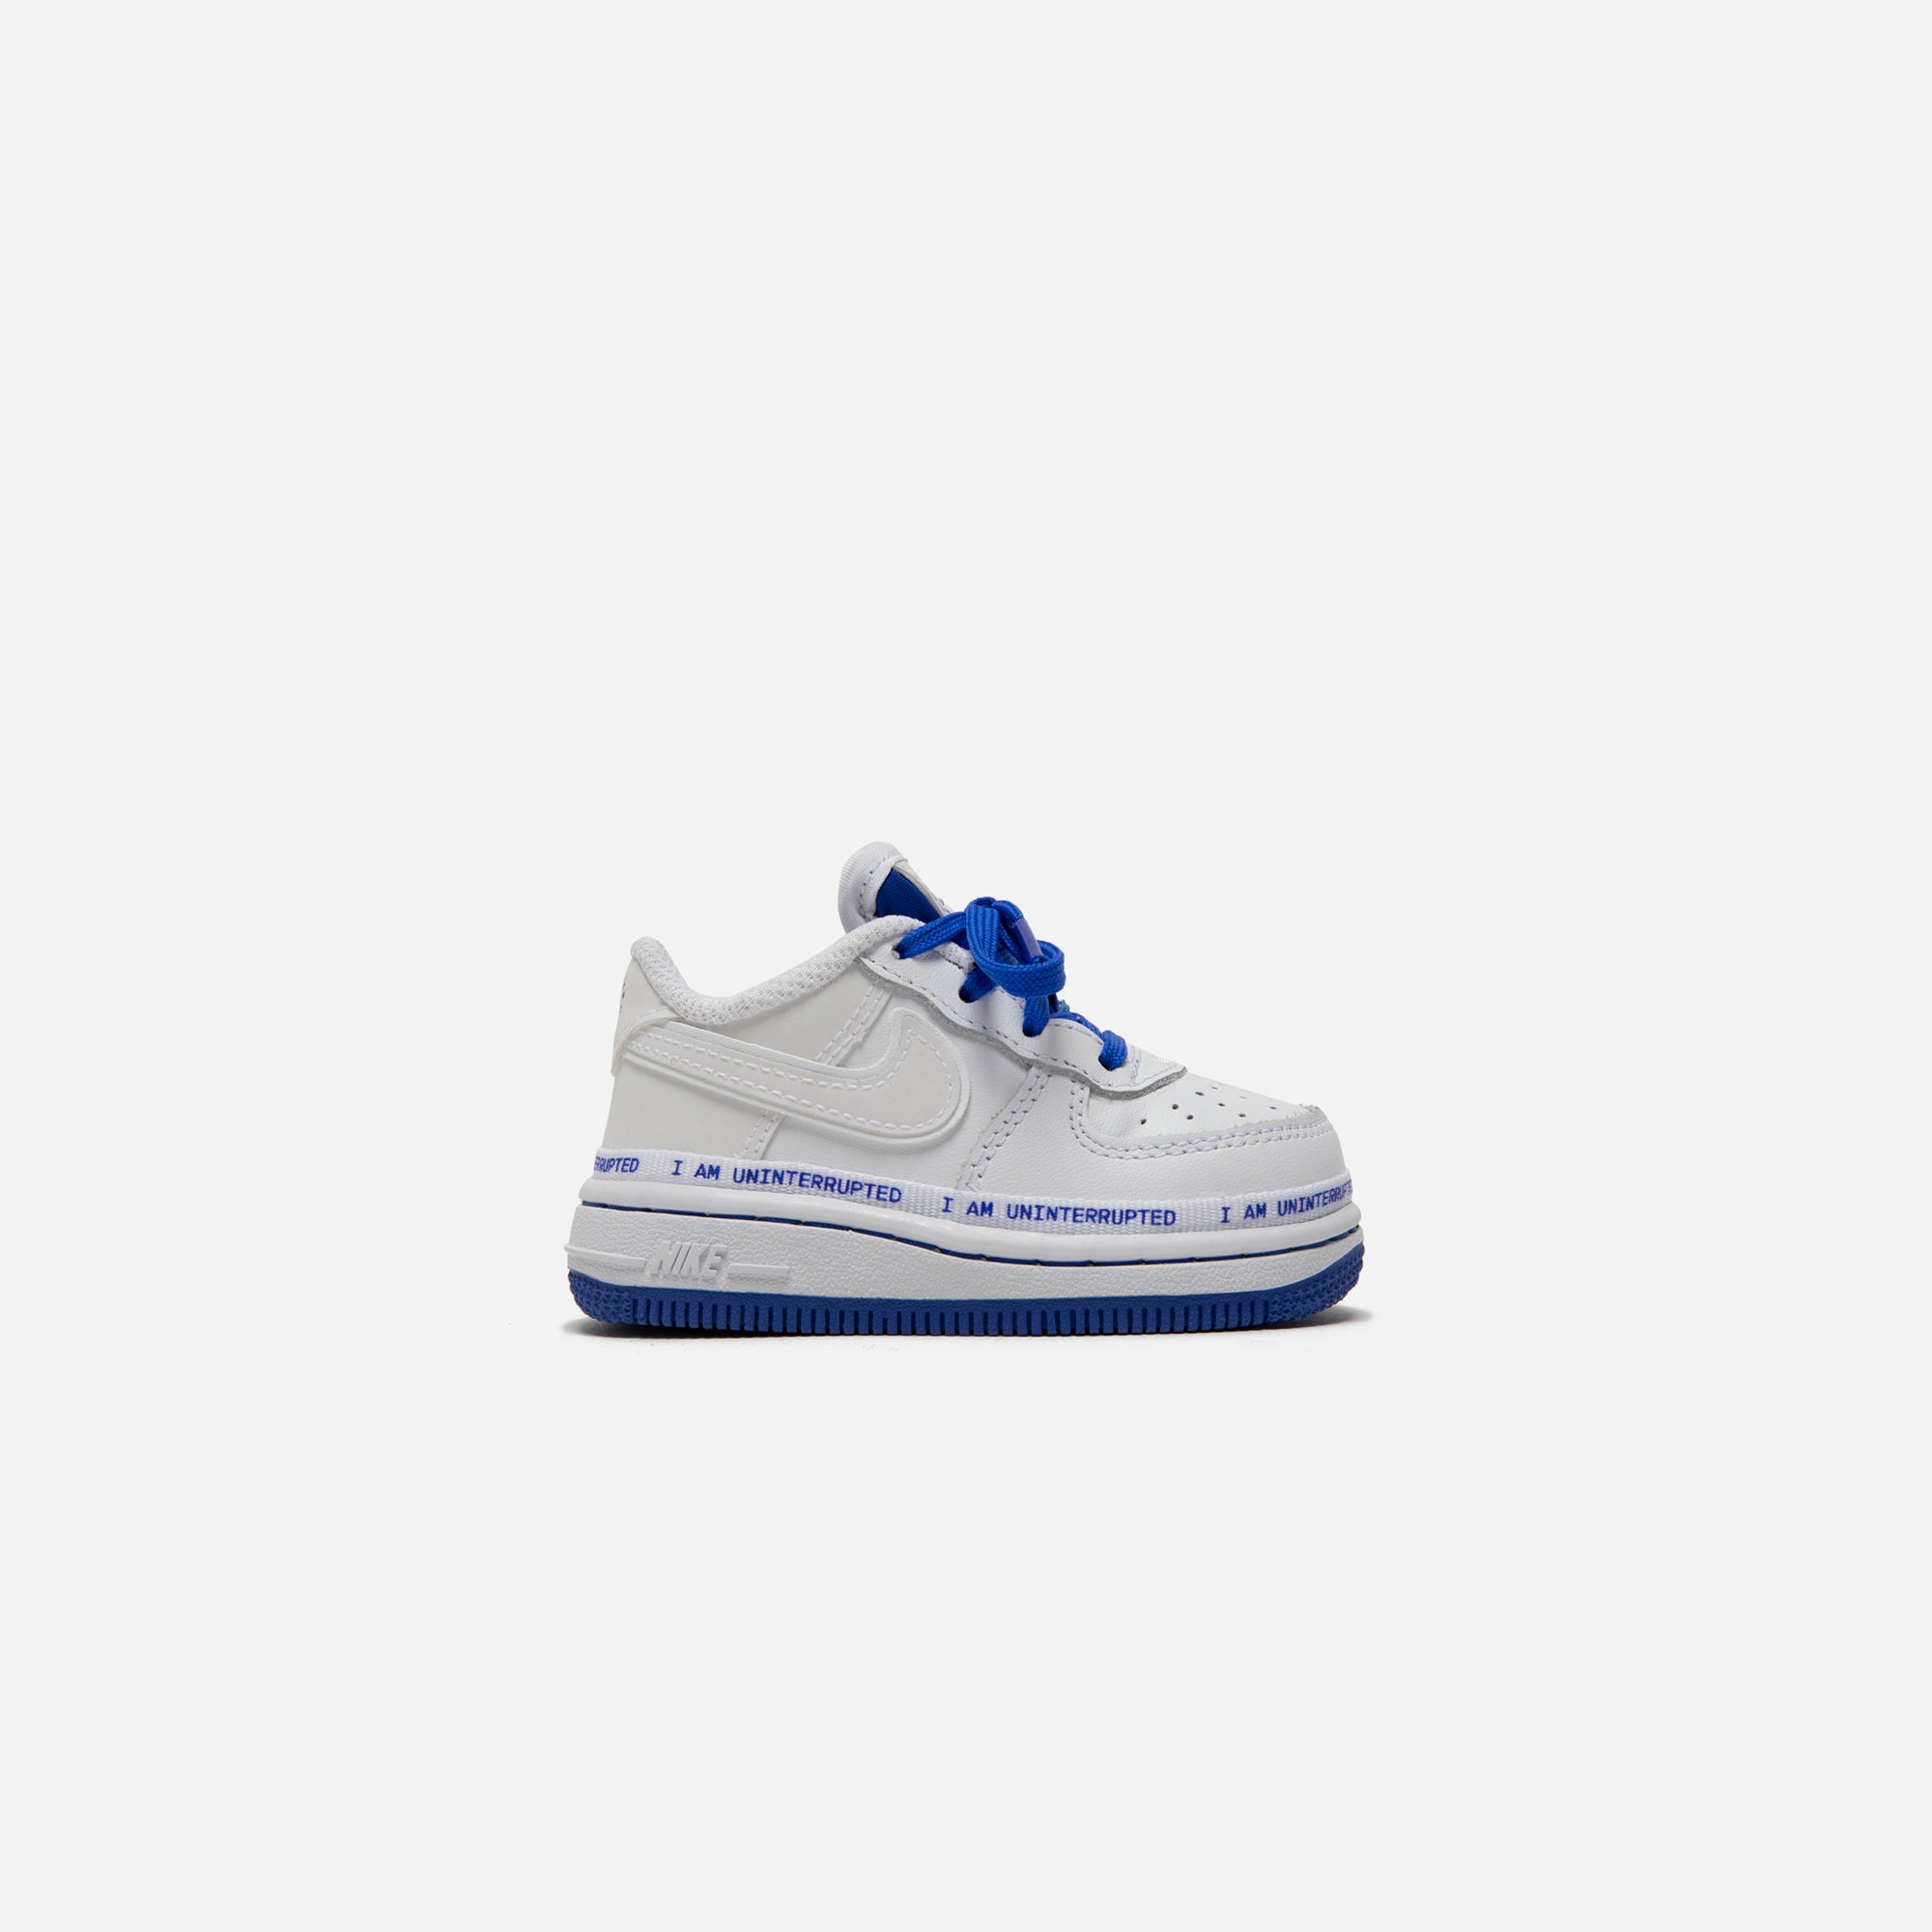 Nike x Uninterrupted Toddler Air Force 1 `07 - White / Black ...